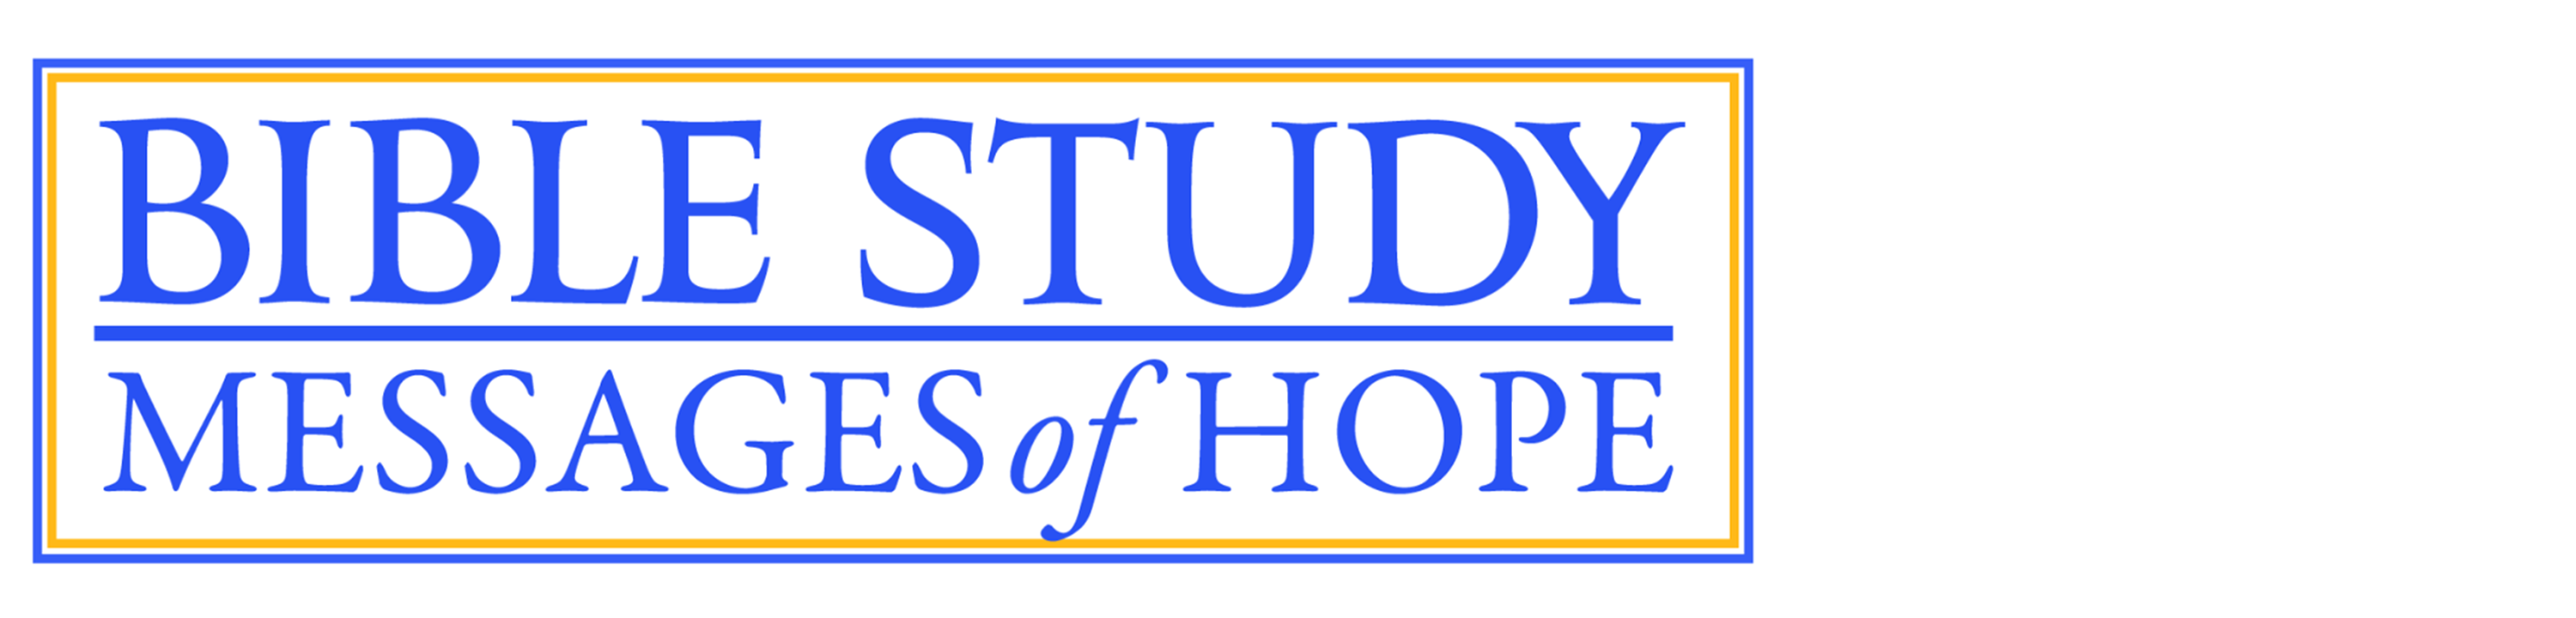 Bible Study: Messages of Hope logo